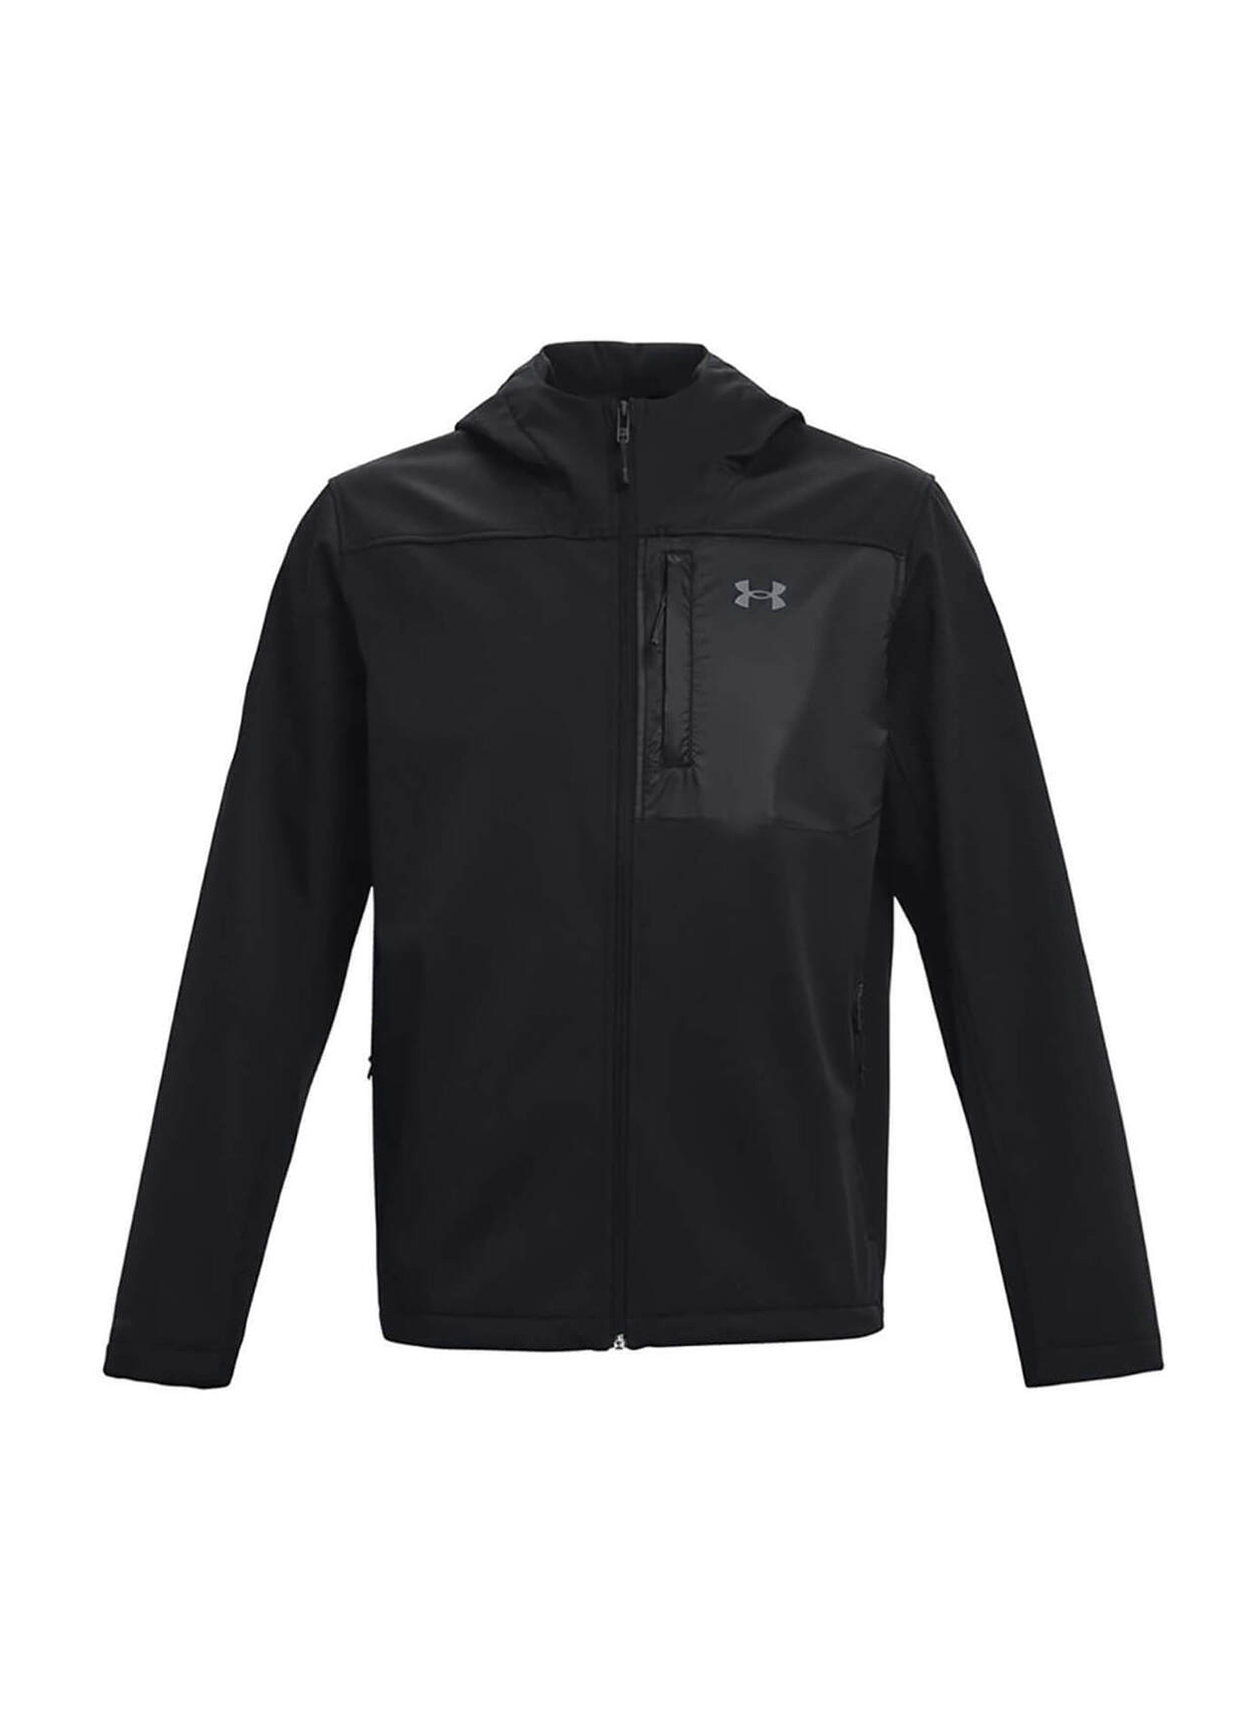 Corporate Under Armour Men's Black ColdGear Infrared Shield 2.0 Hooded  Jacket